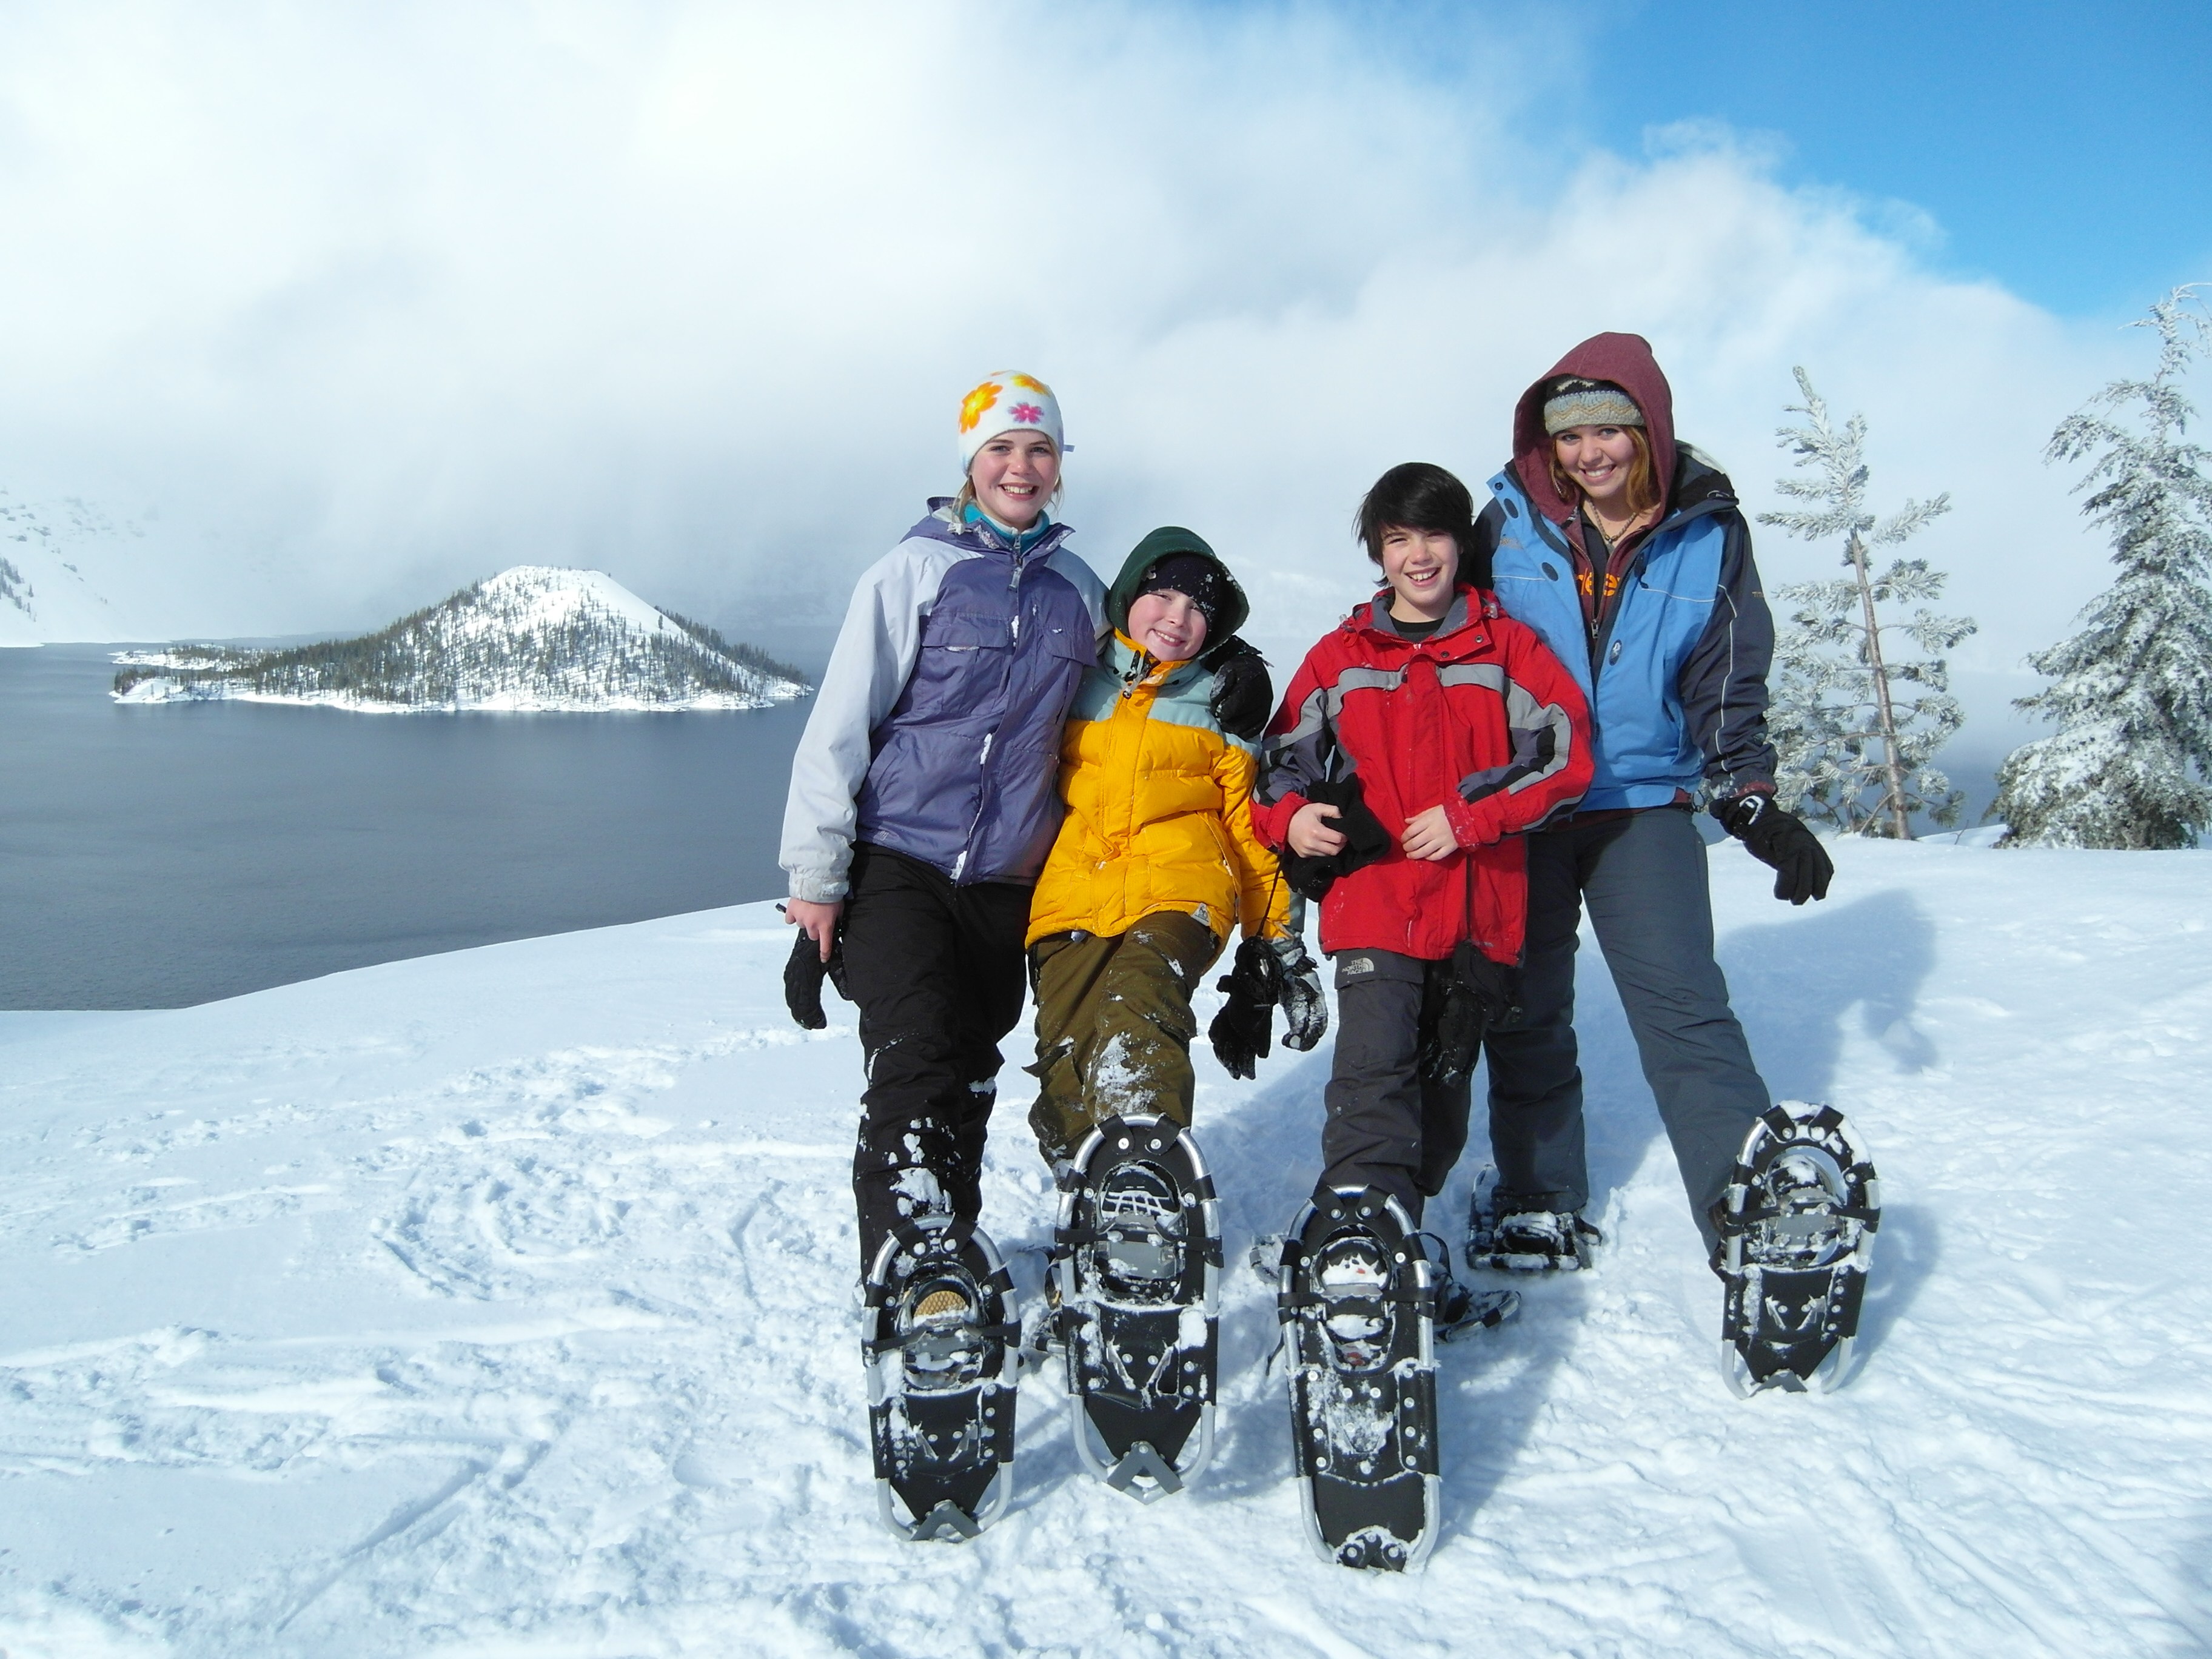 Central Oregon Snowshoeing at Crater Lake National Park